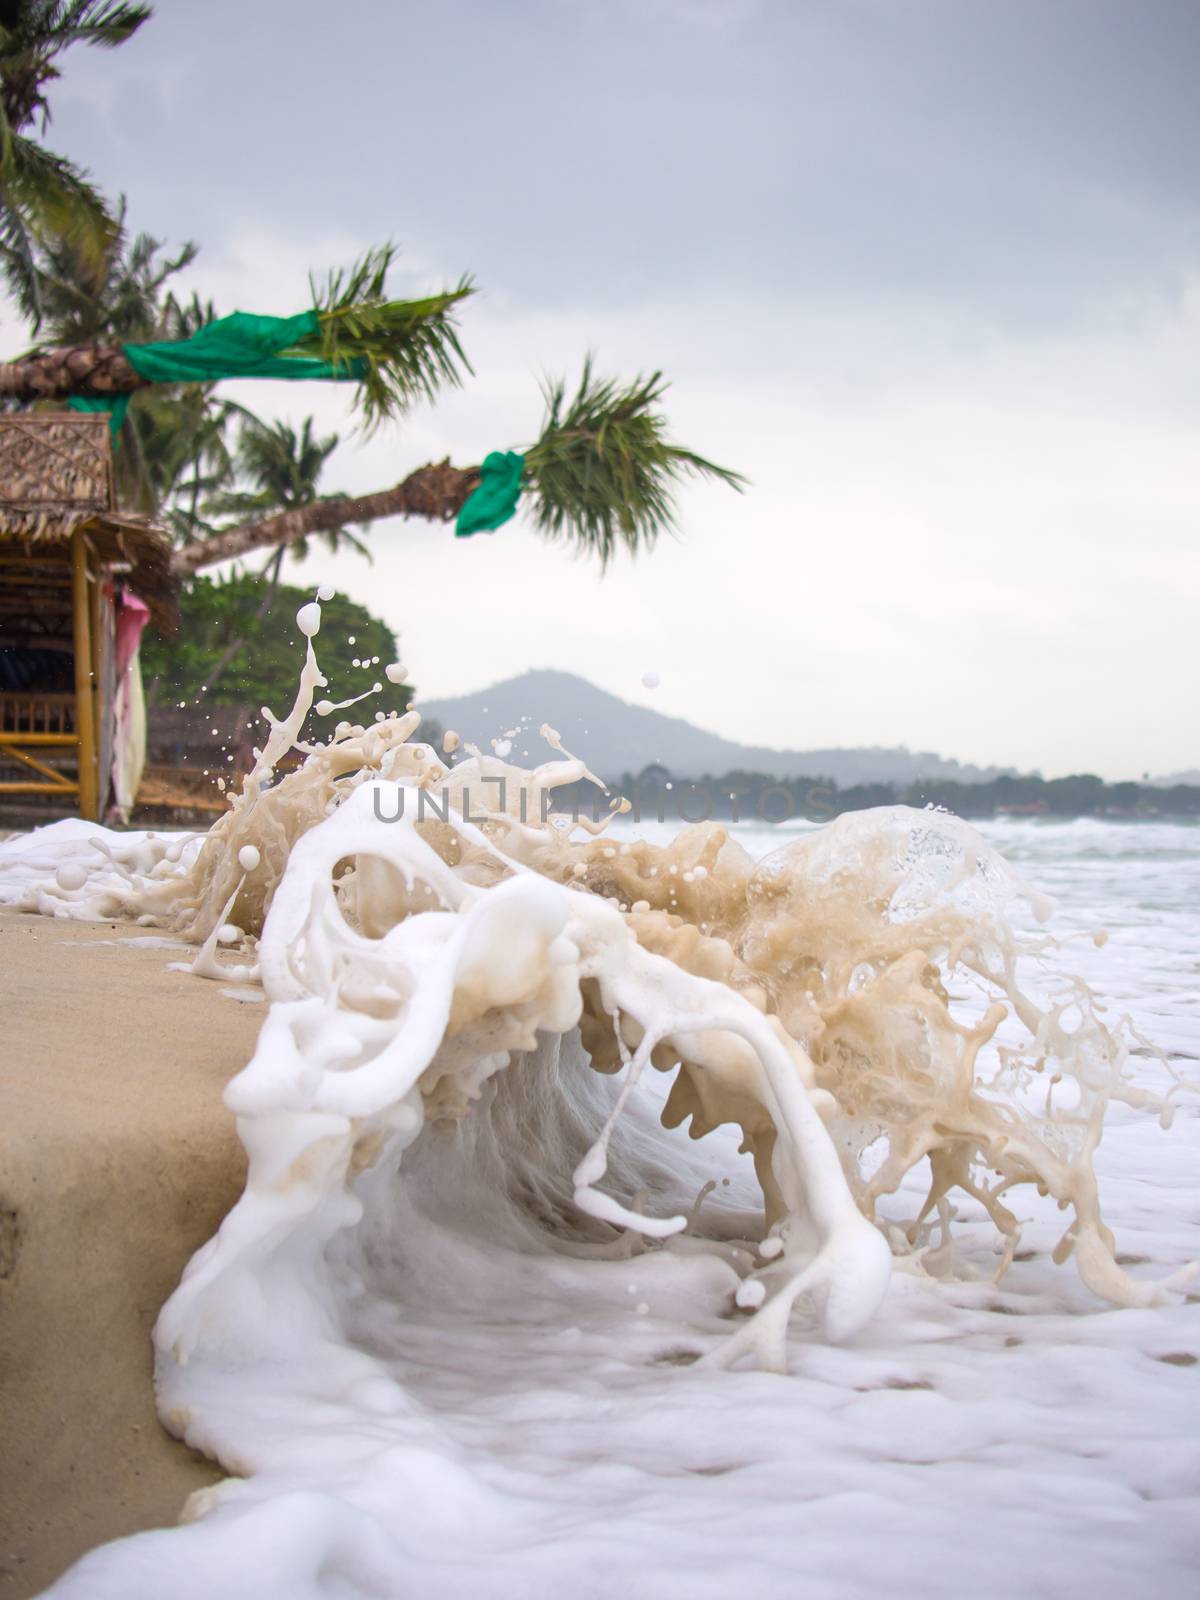 Stormy day in the beach of Chaweng in Koh Samui  by Netfalls